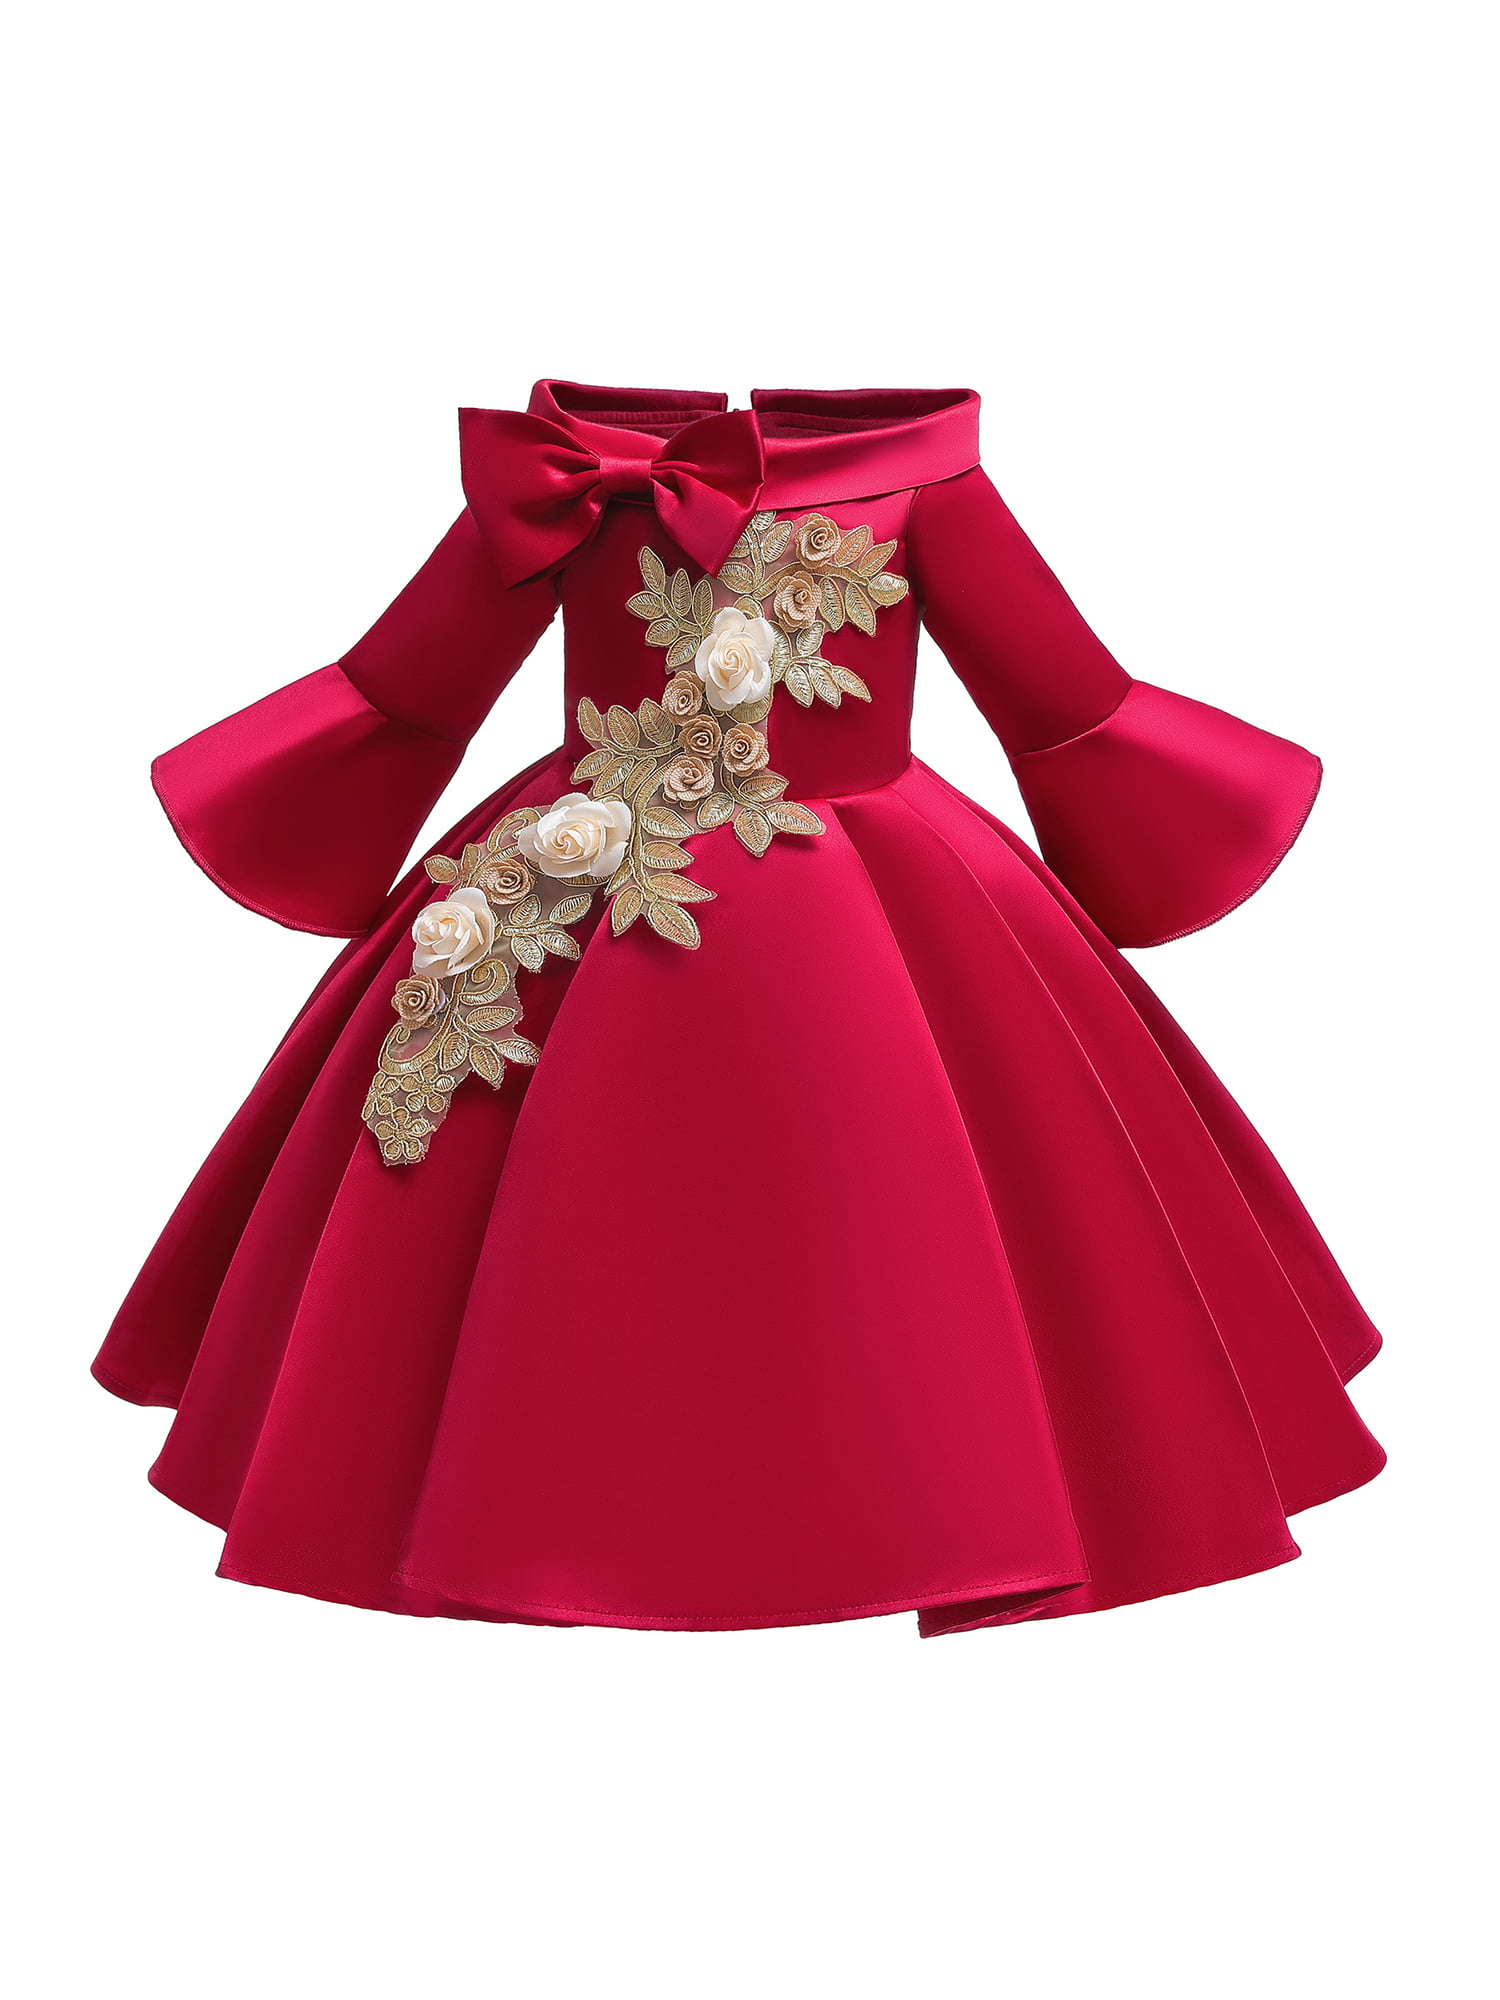 Outfit Toddler Gifts dress Dresses Kids bridesmaid Christmas Sweet princess 